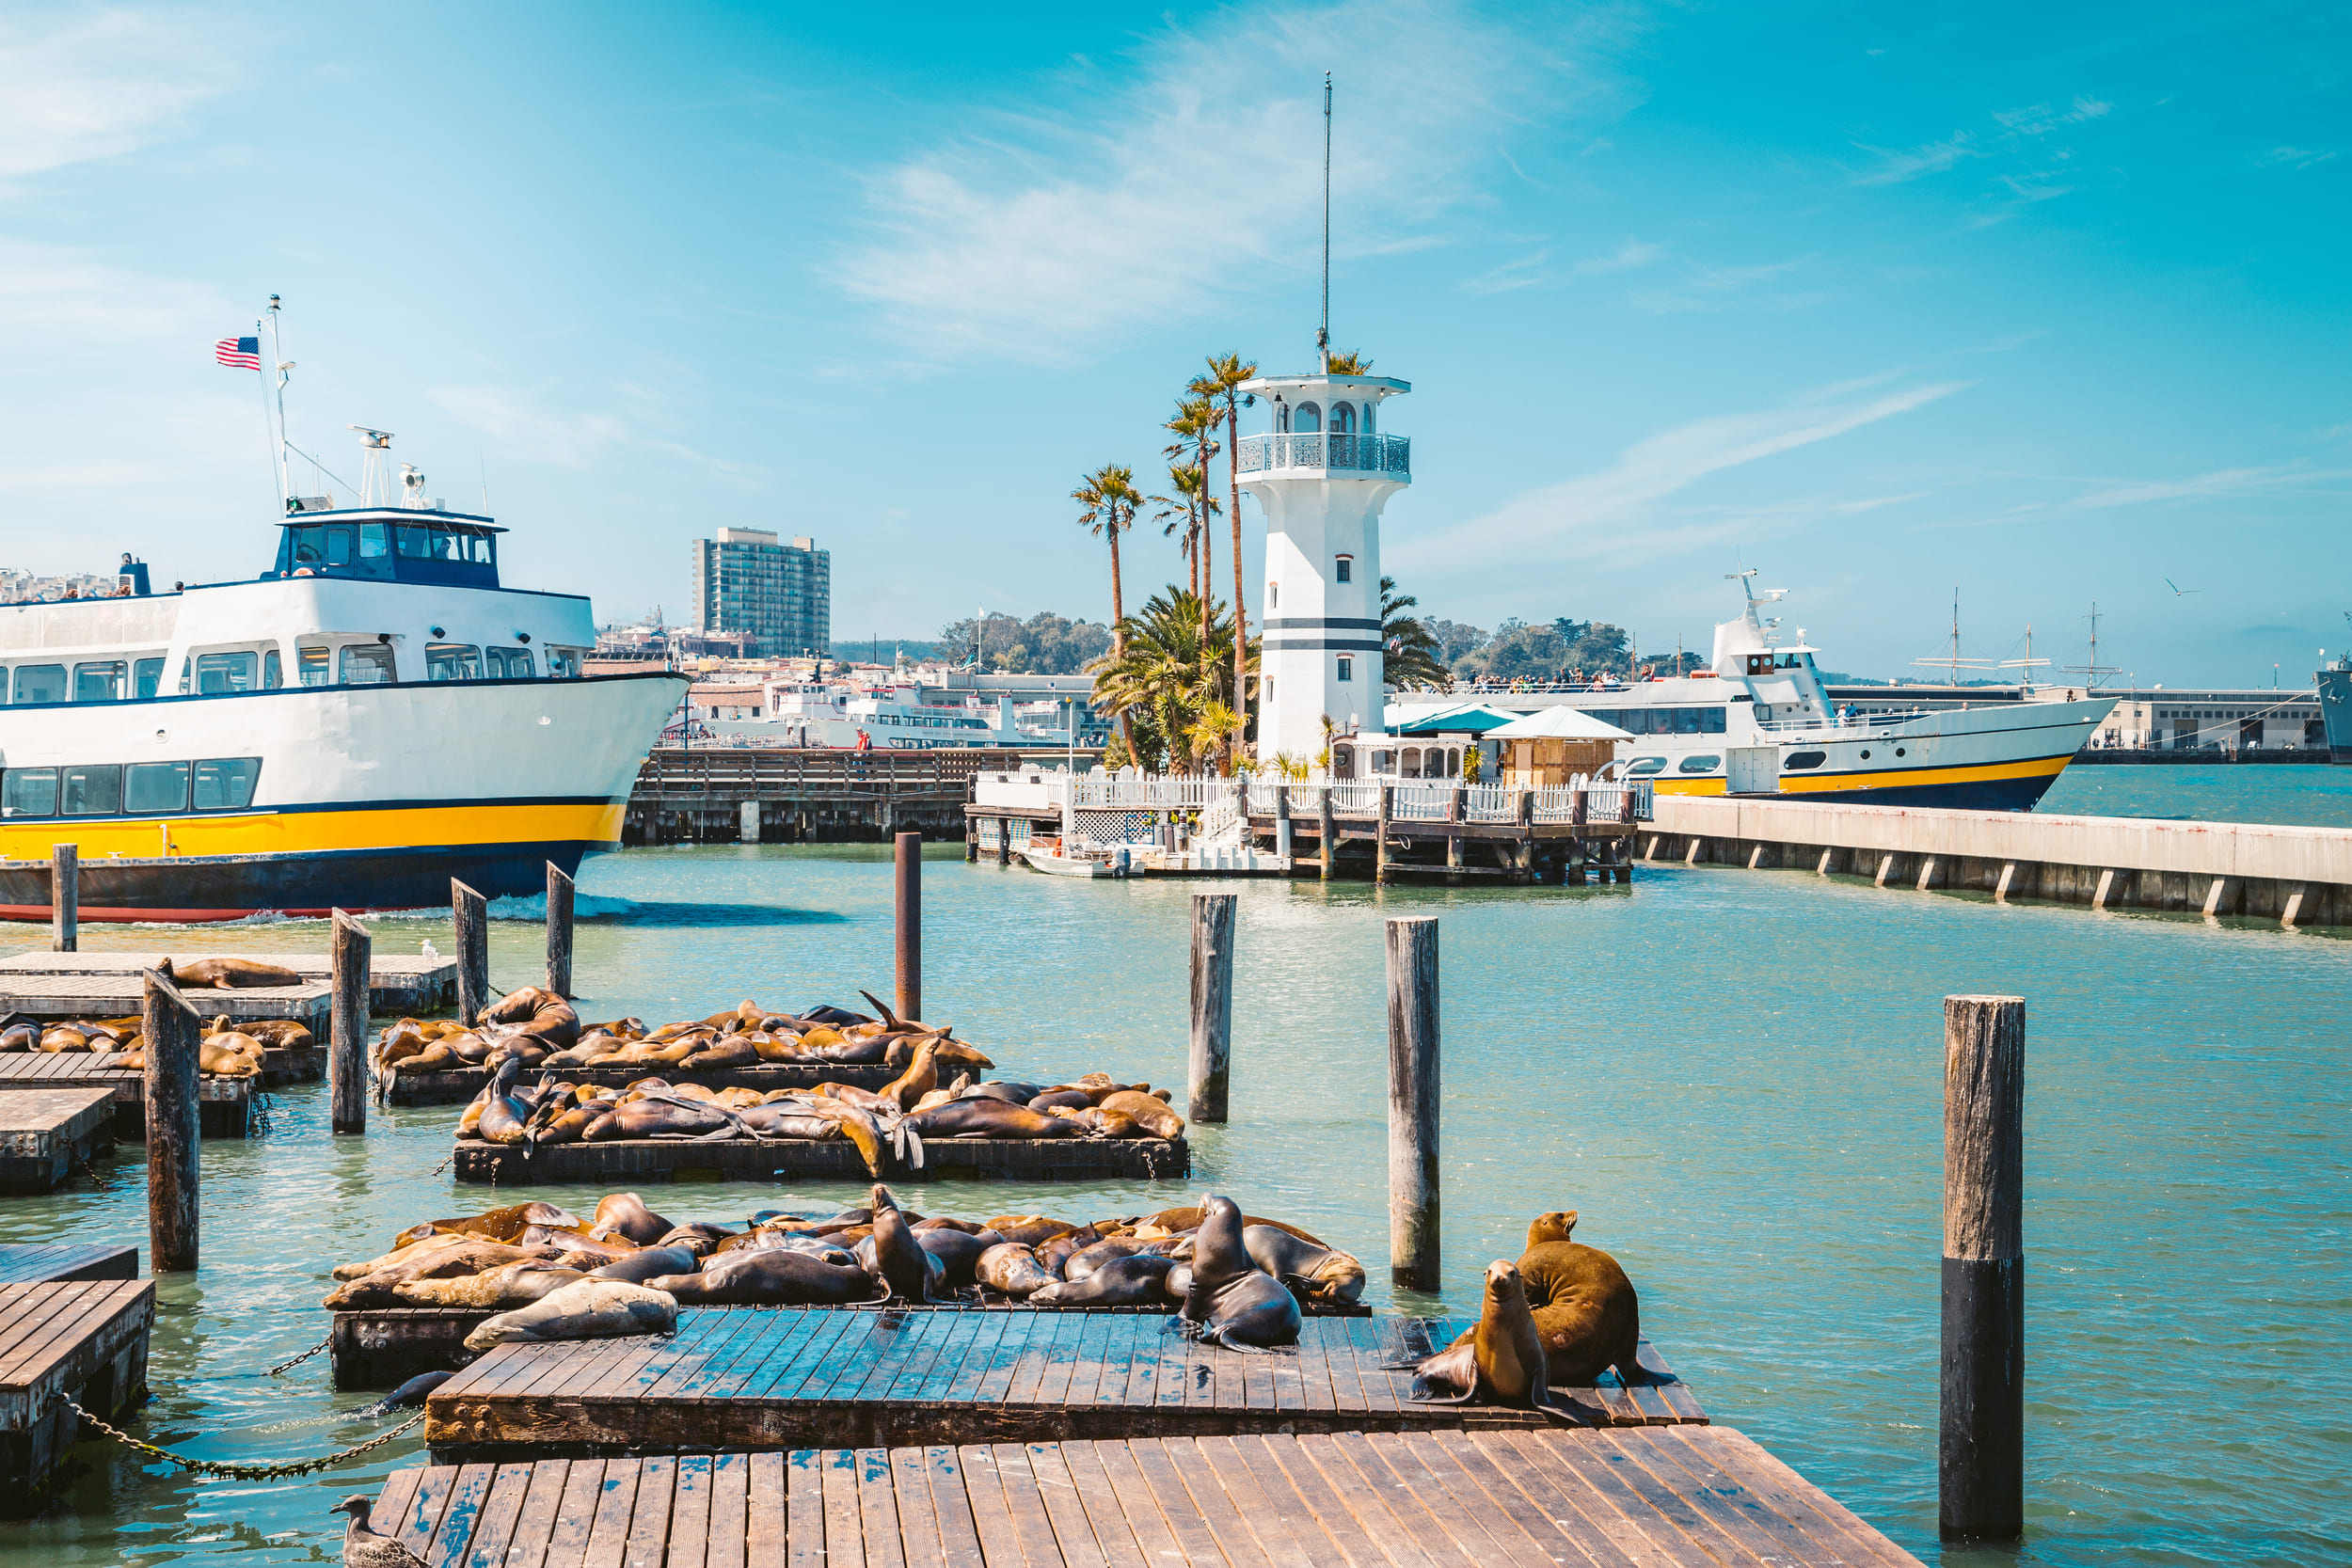 Sea Lions at Pier 39  The Marina, Fisherman's Wharf & the Piers